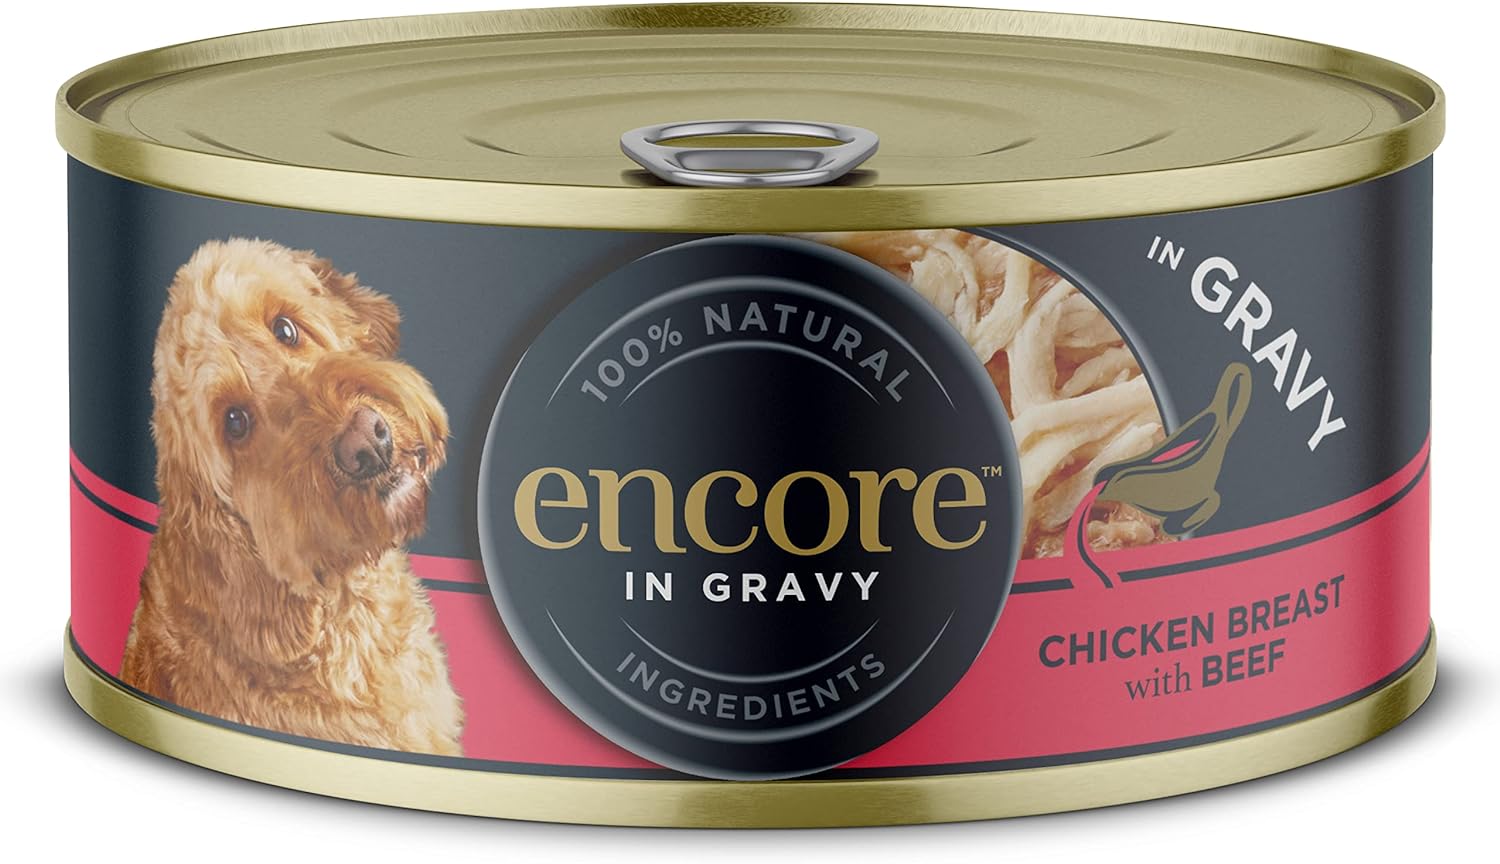 Encore 100% Natural Wet Dog Food, Grain Free Chicken with Beef in Gravy Pack of 12 x 156g Tins?ENC3412-4SC